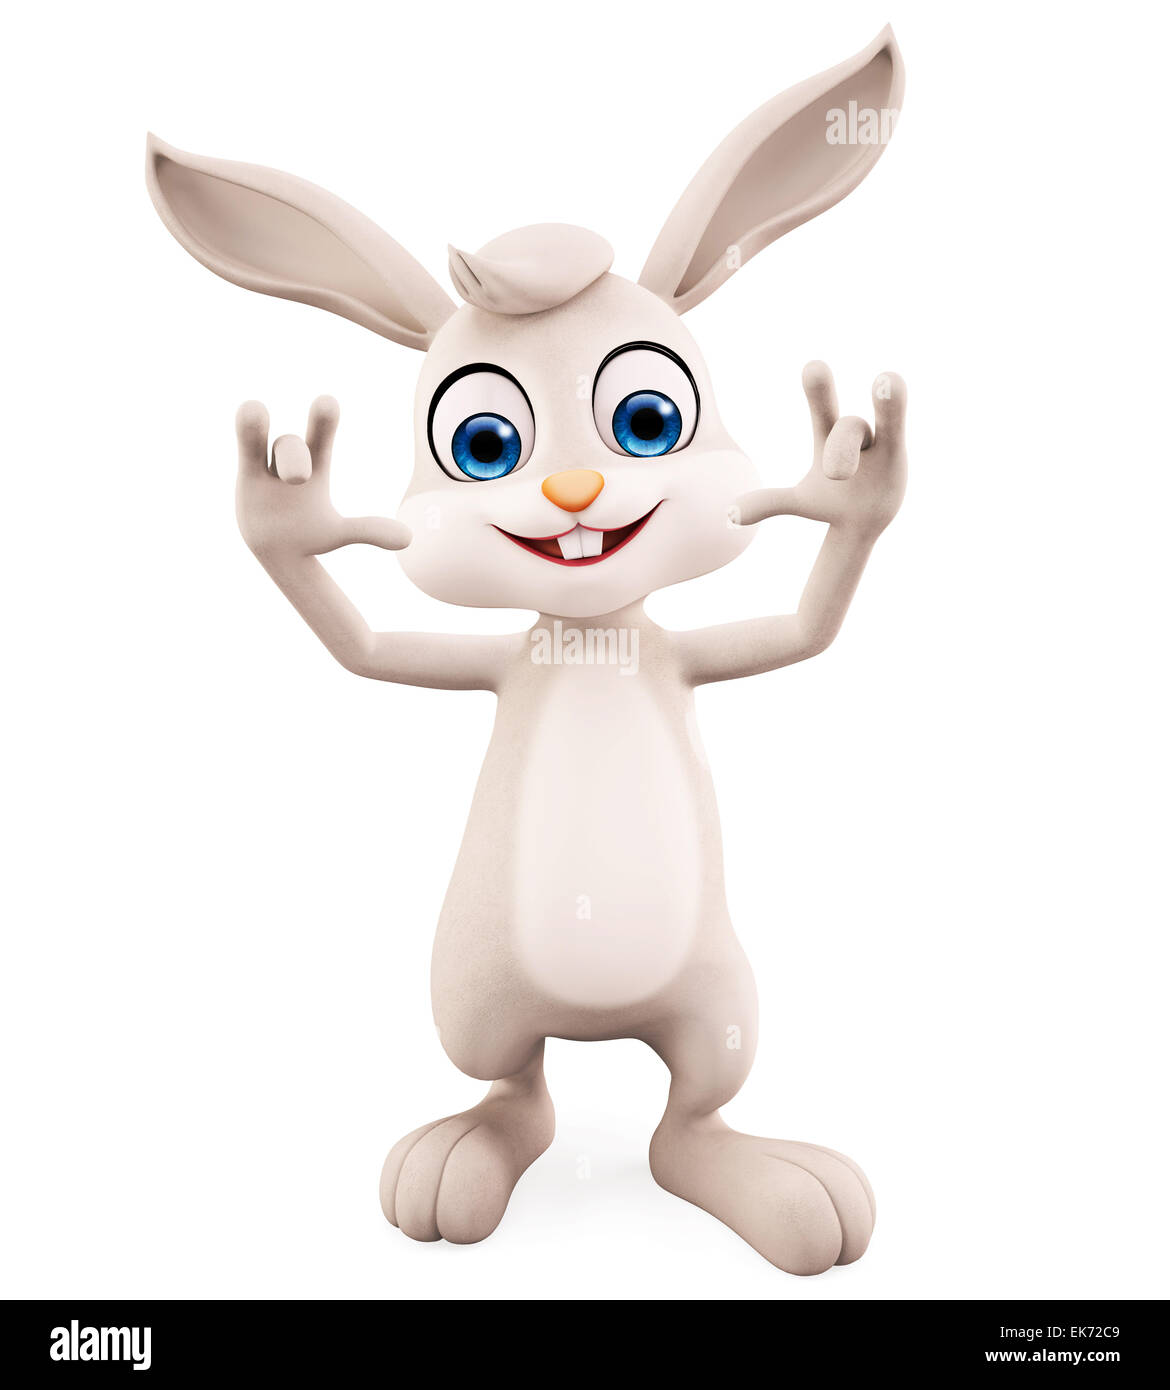 3D illustration of Easter bunny with funny pose Stock Photo